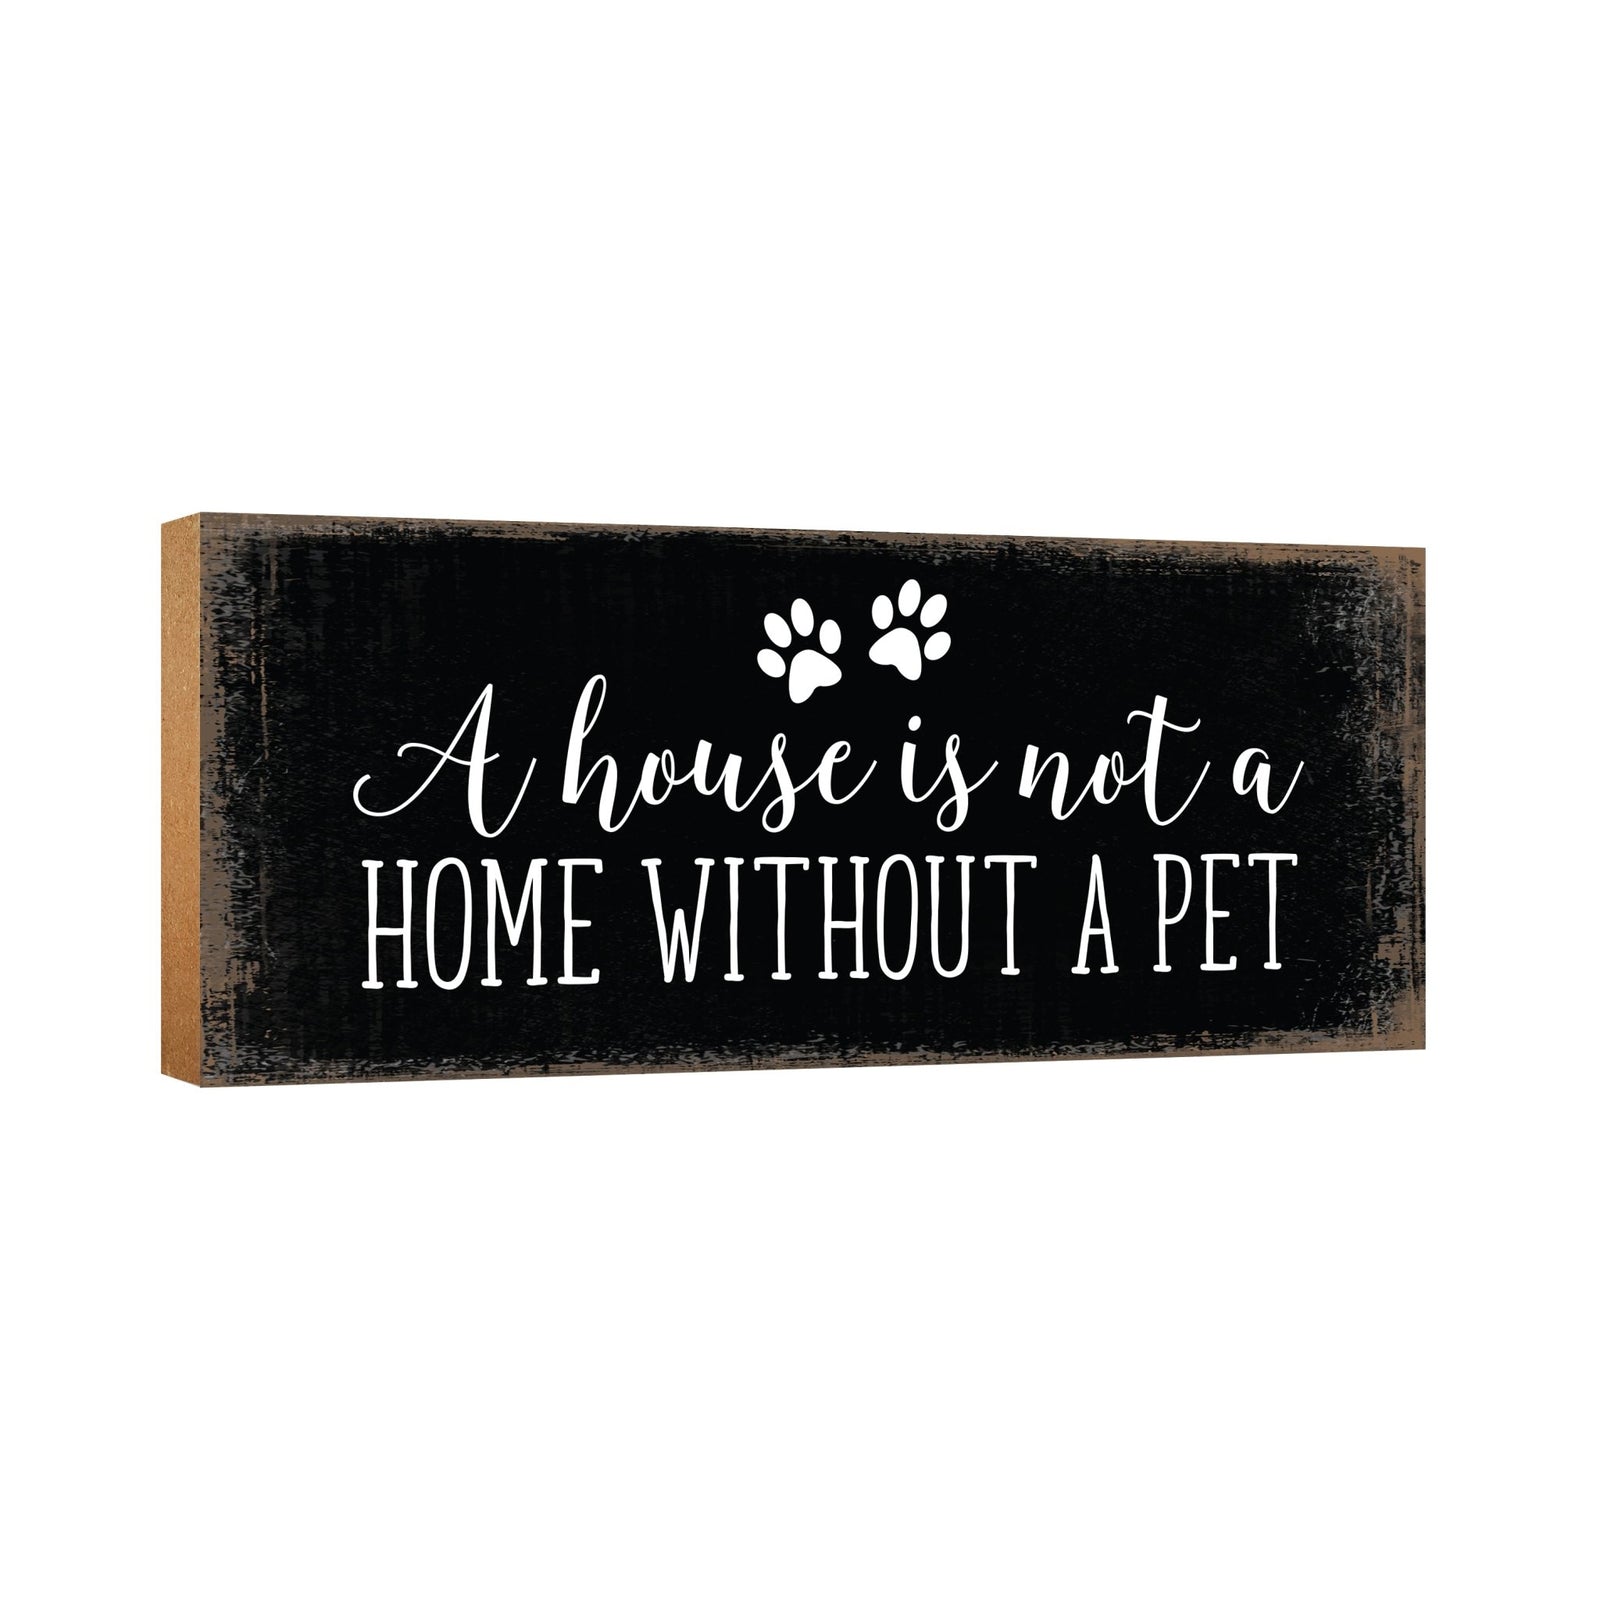 Modern Inspirational Pet Memorial 4x10 inches Wooden Sign (A House Is Not A Home) Tabletop Plaque Home Decoration Loss of Pet Bereavement Sympathy Keepsake - LifeSong Milestones